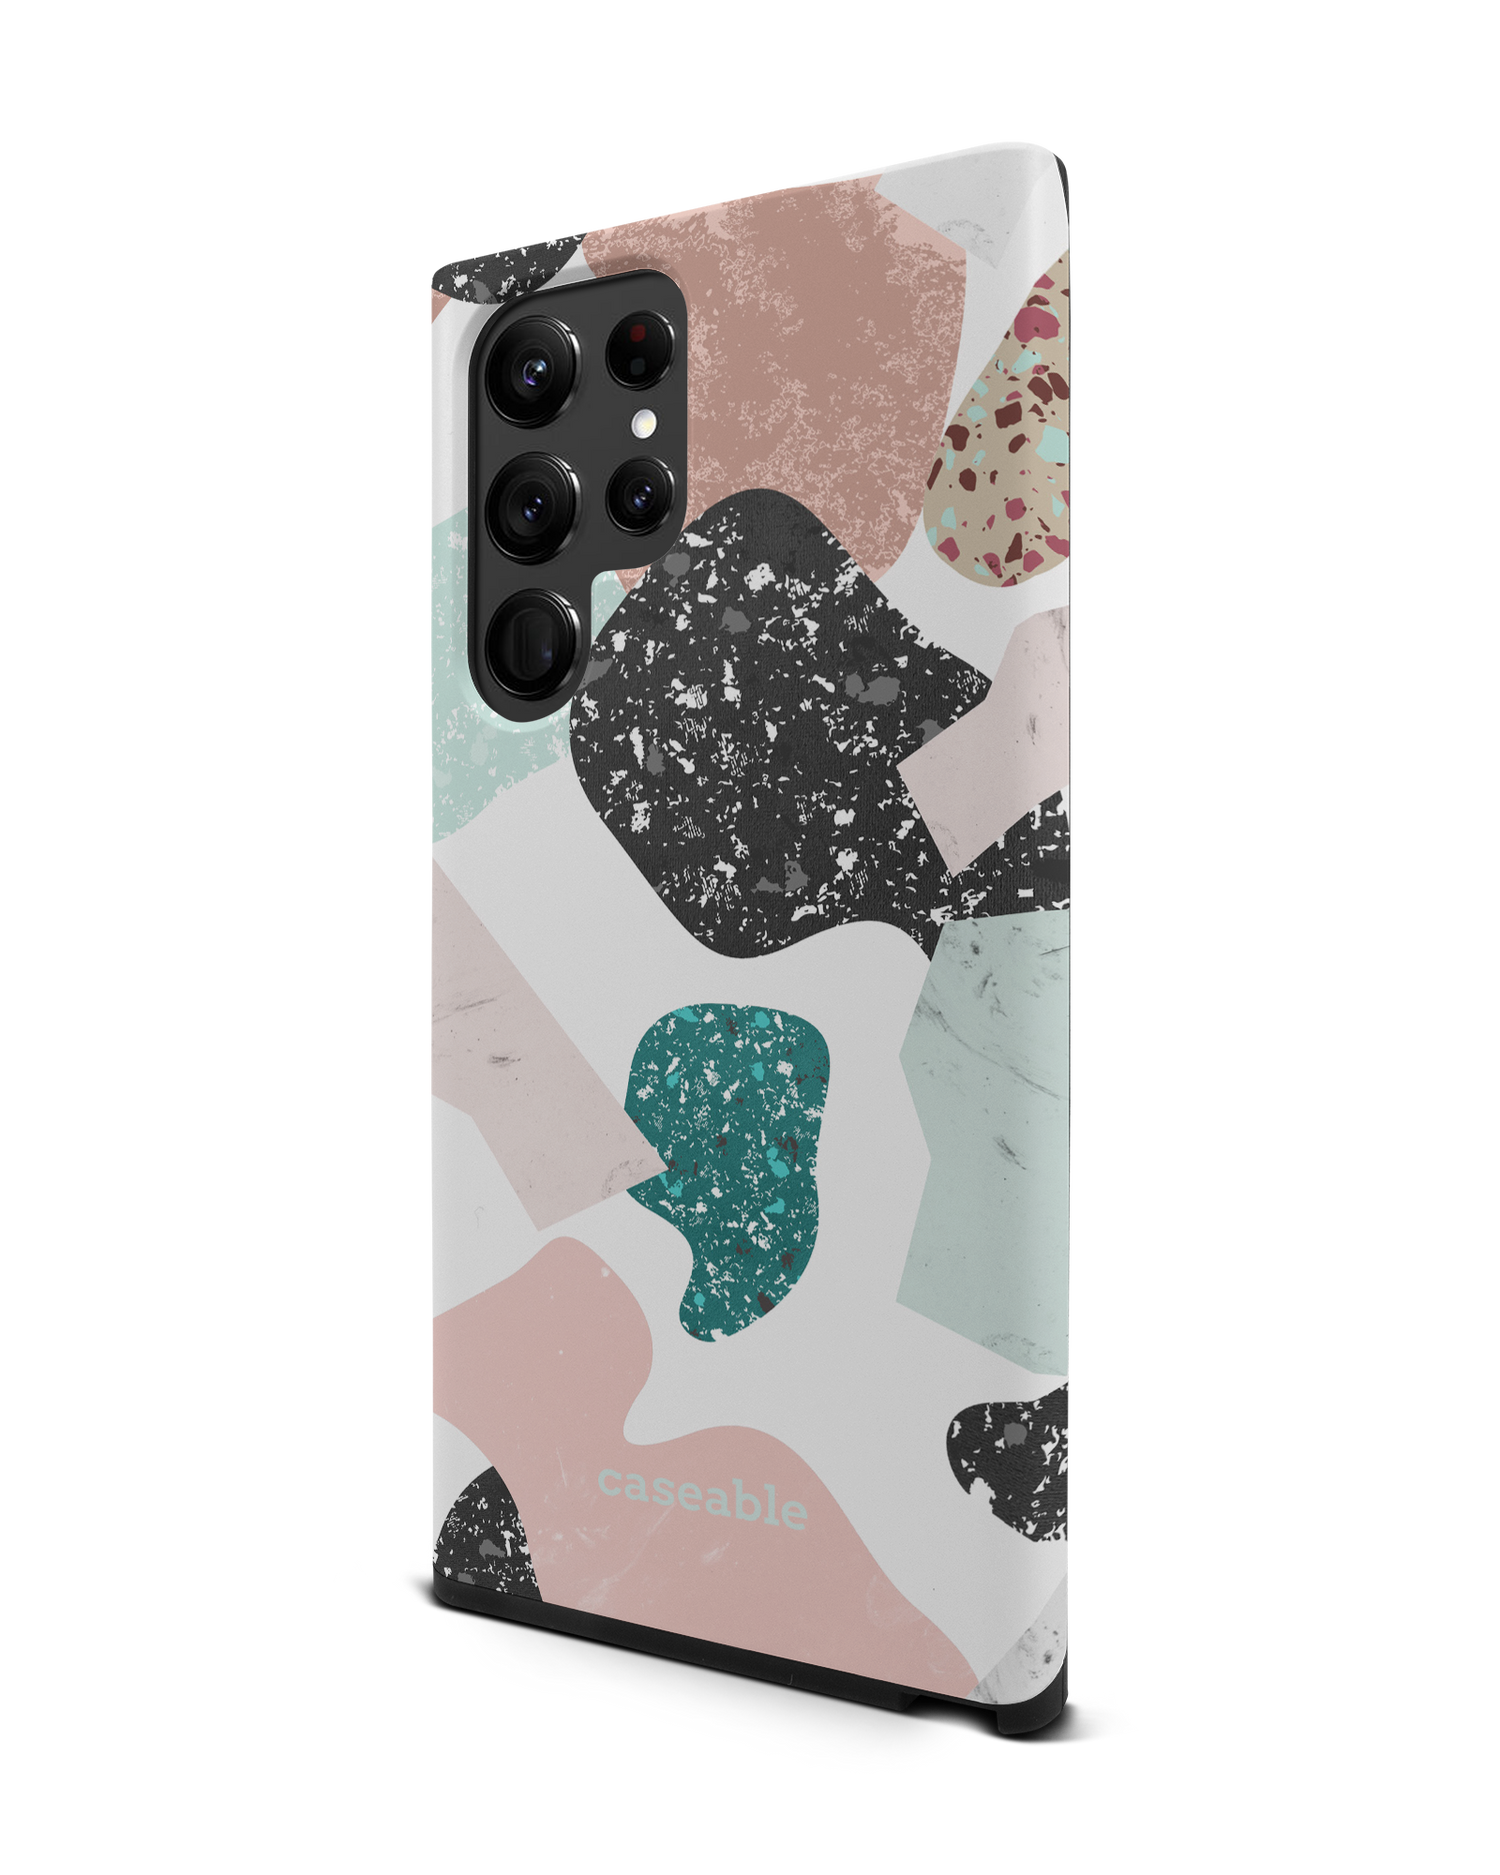 Scattered Shapes Premium Phone Case Samsung Galaxy S22 Ultra 5G: View from the right side